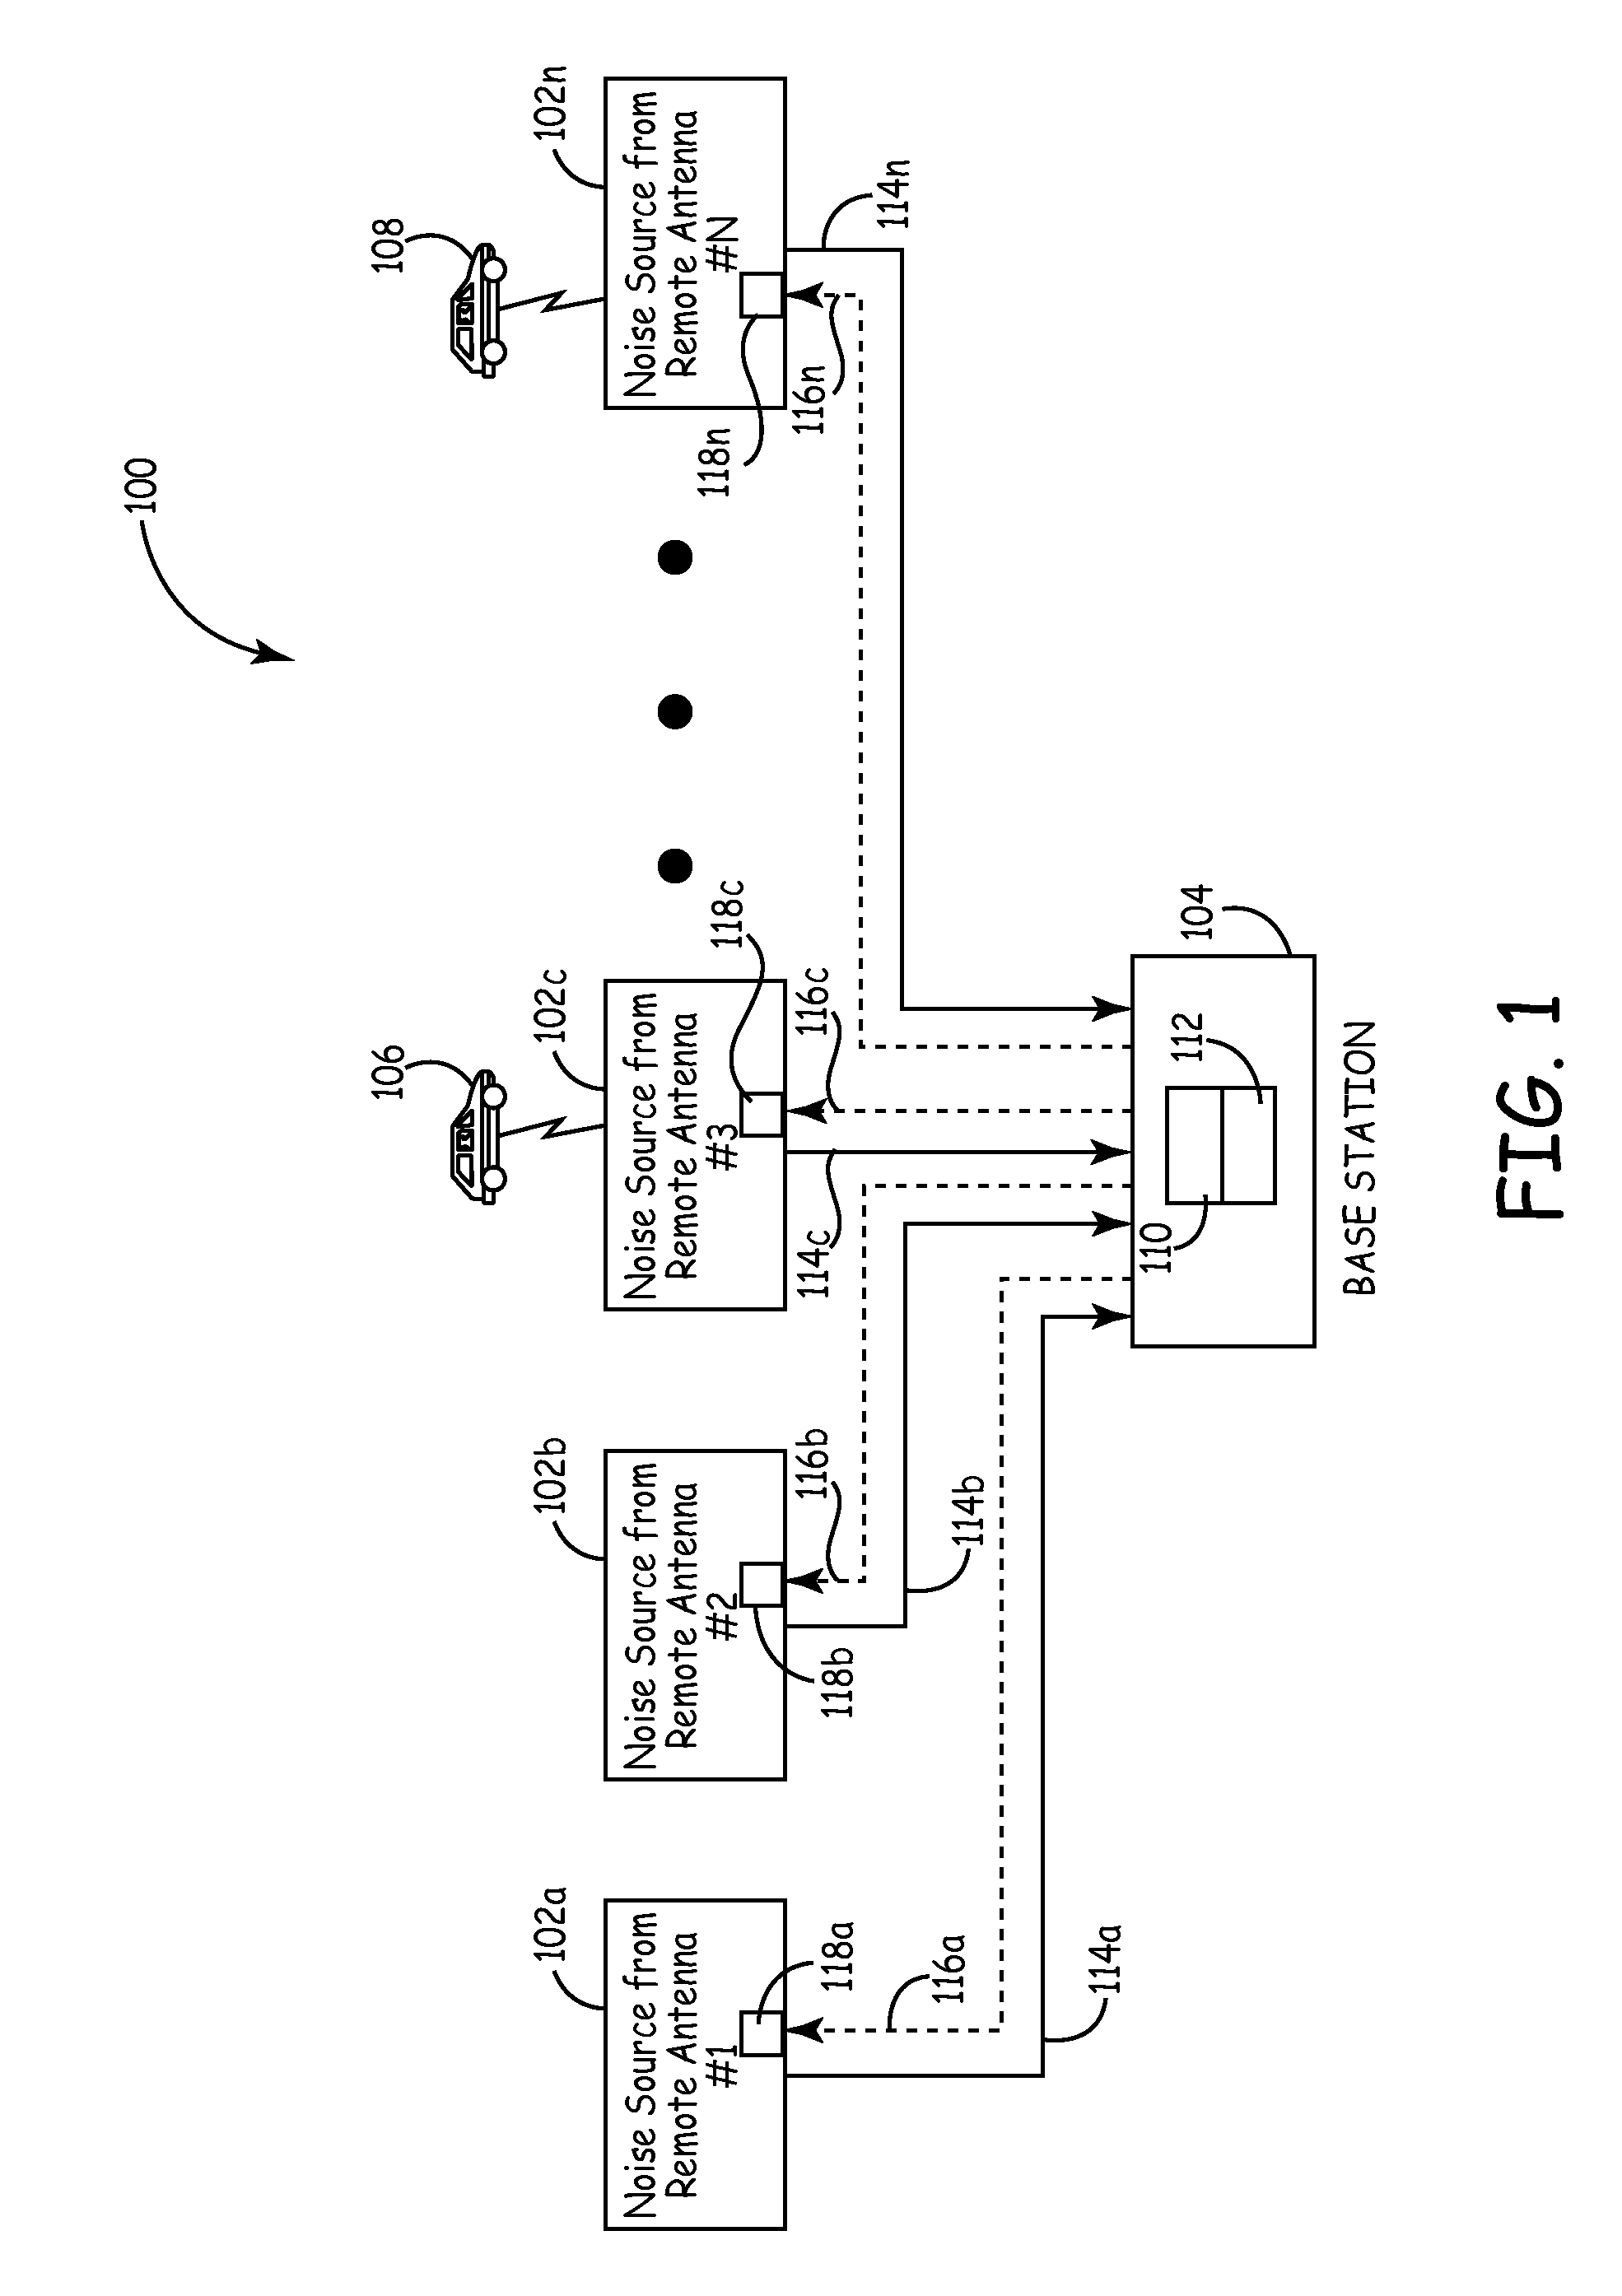 Method and system for reducing uplink noise in wireless communication systems